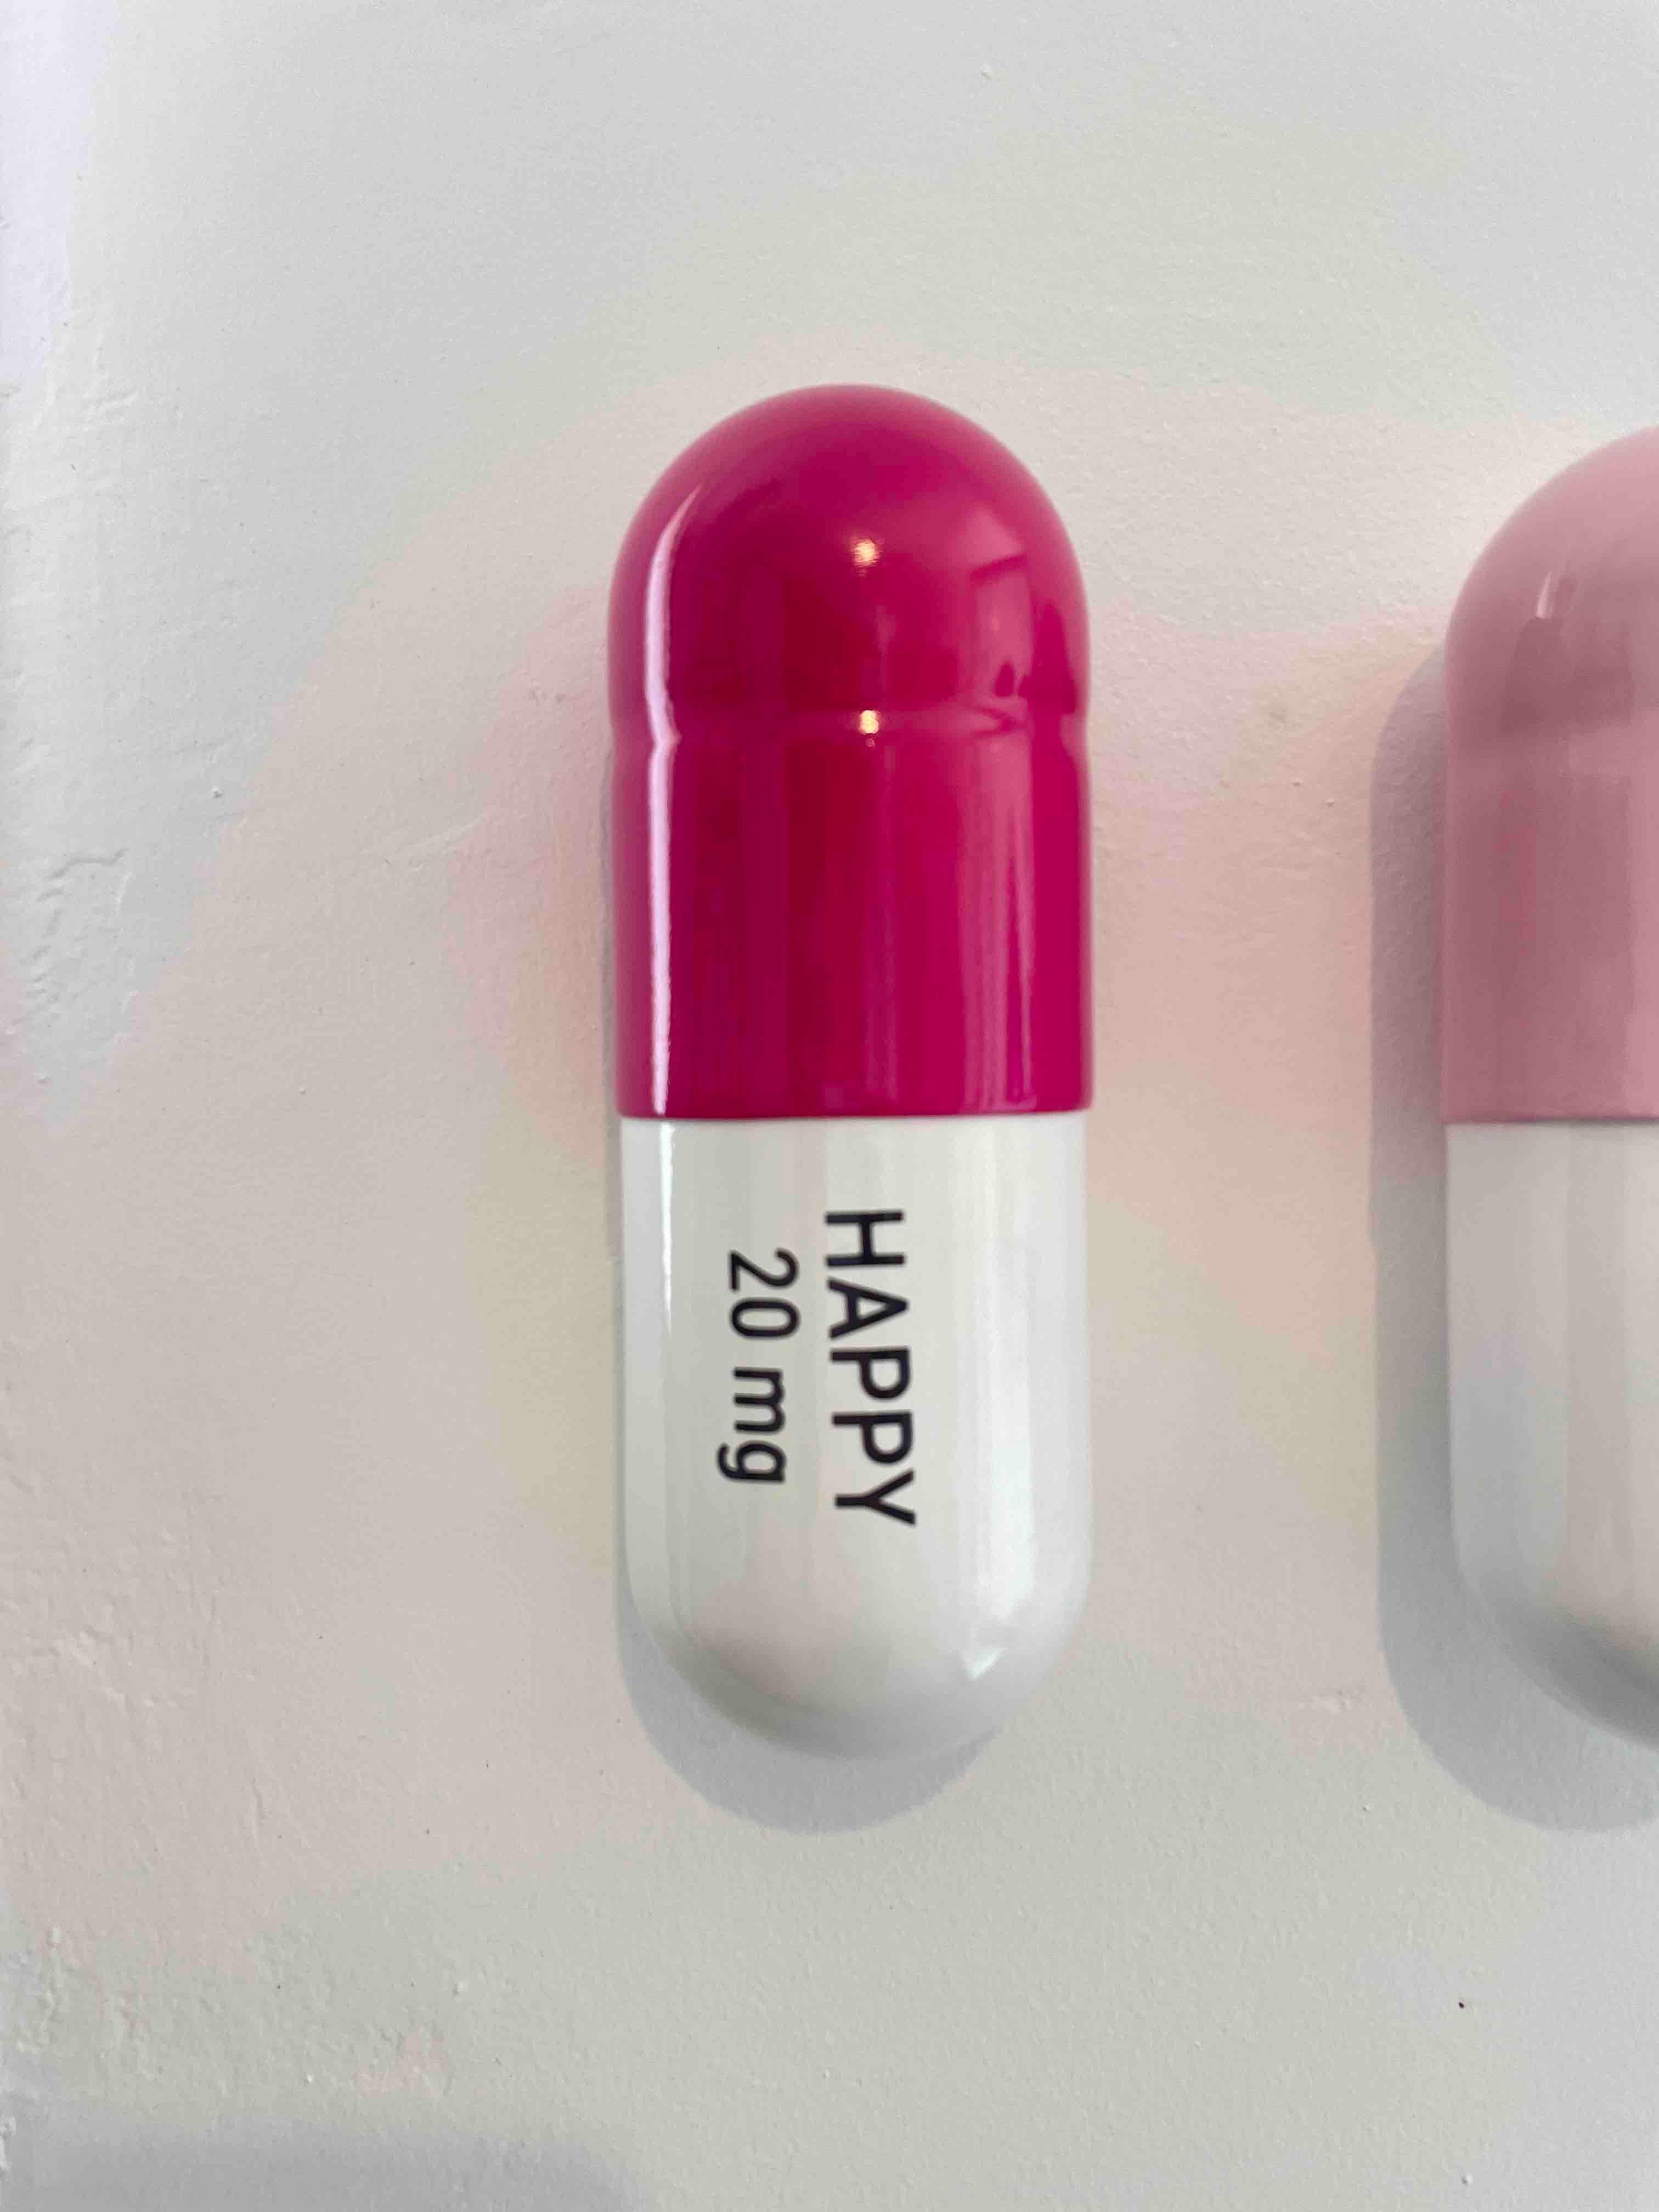 20 MG Happy pill Combo (turquoise, light pink and pink) - figurative sculpture - Pop Art Sculpture by Tal Nehoray